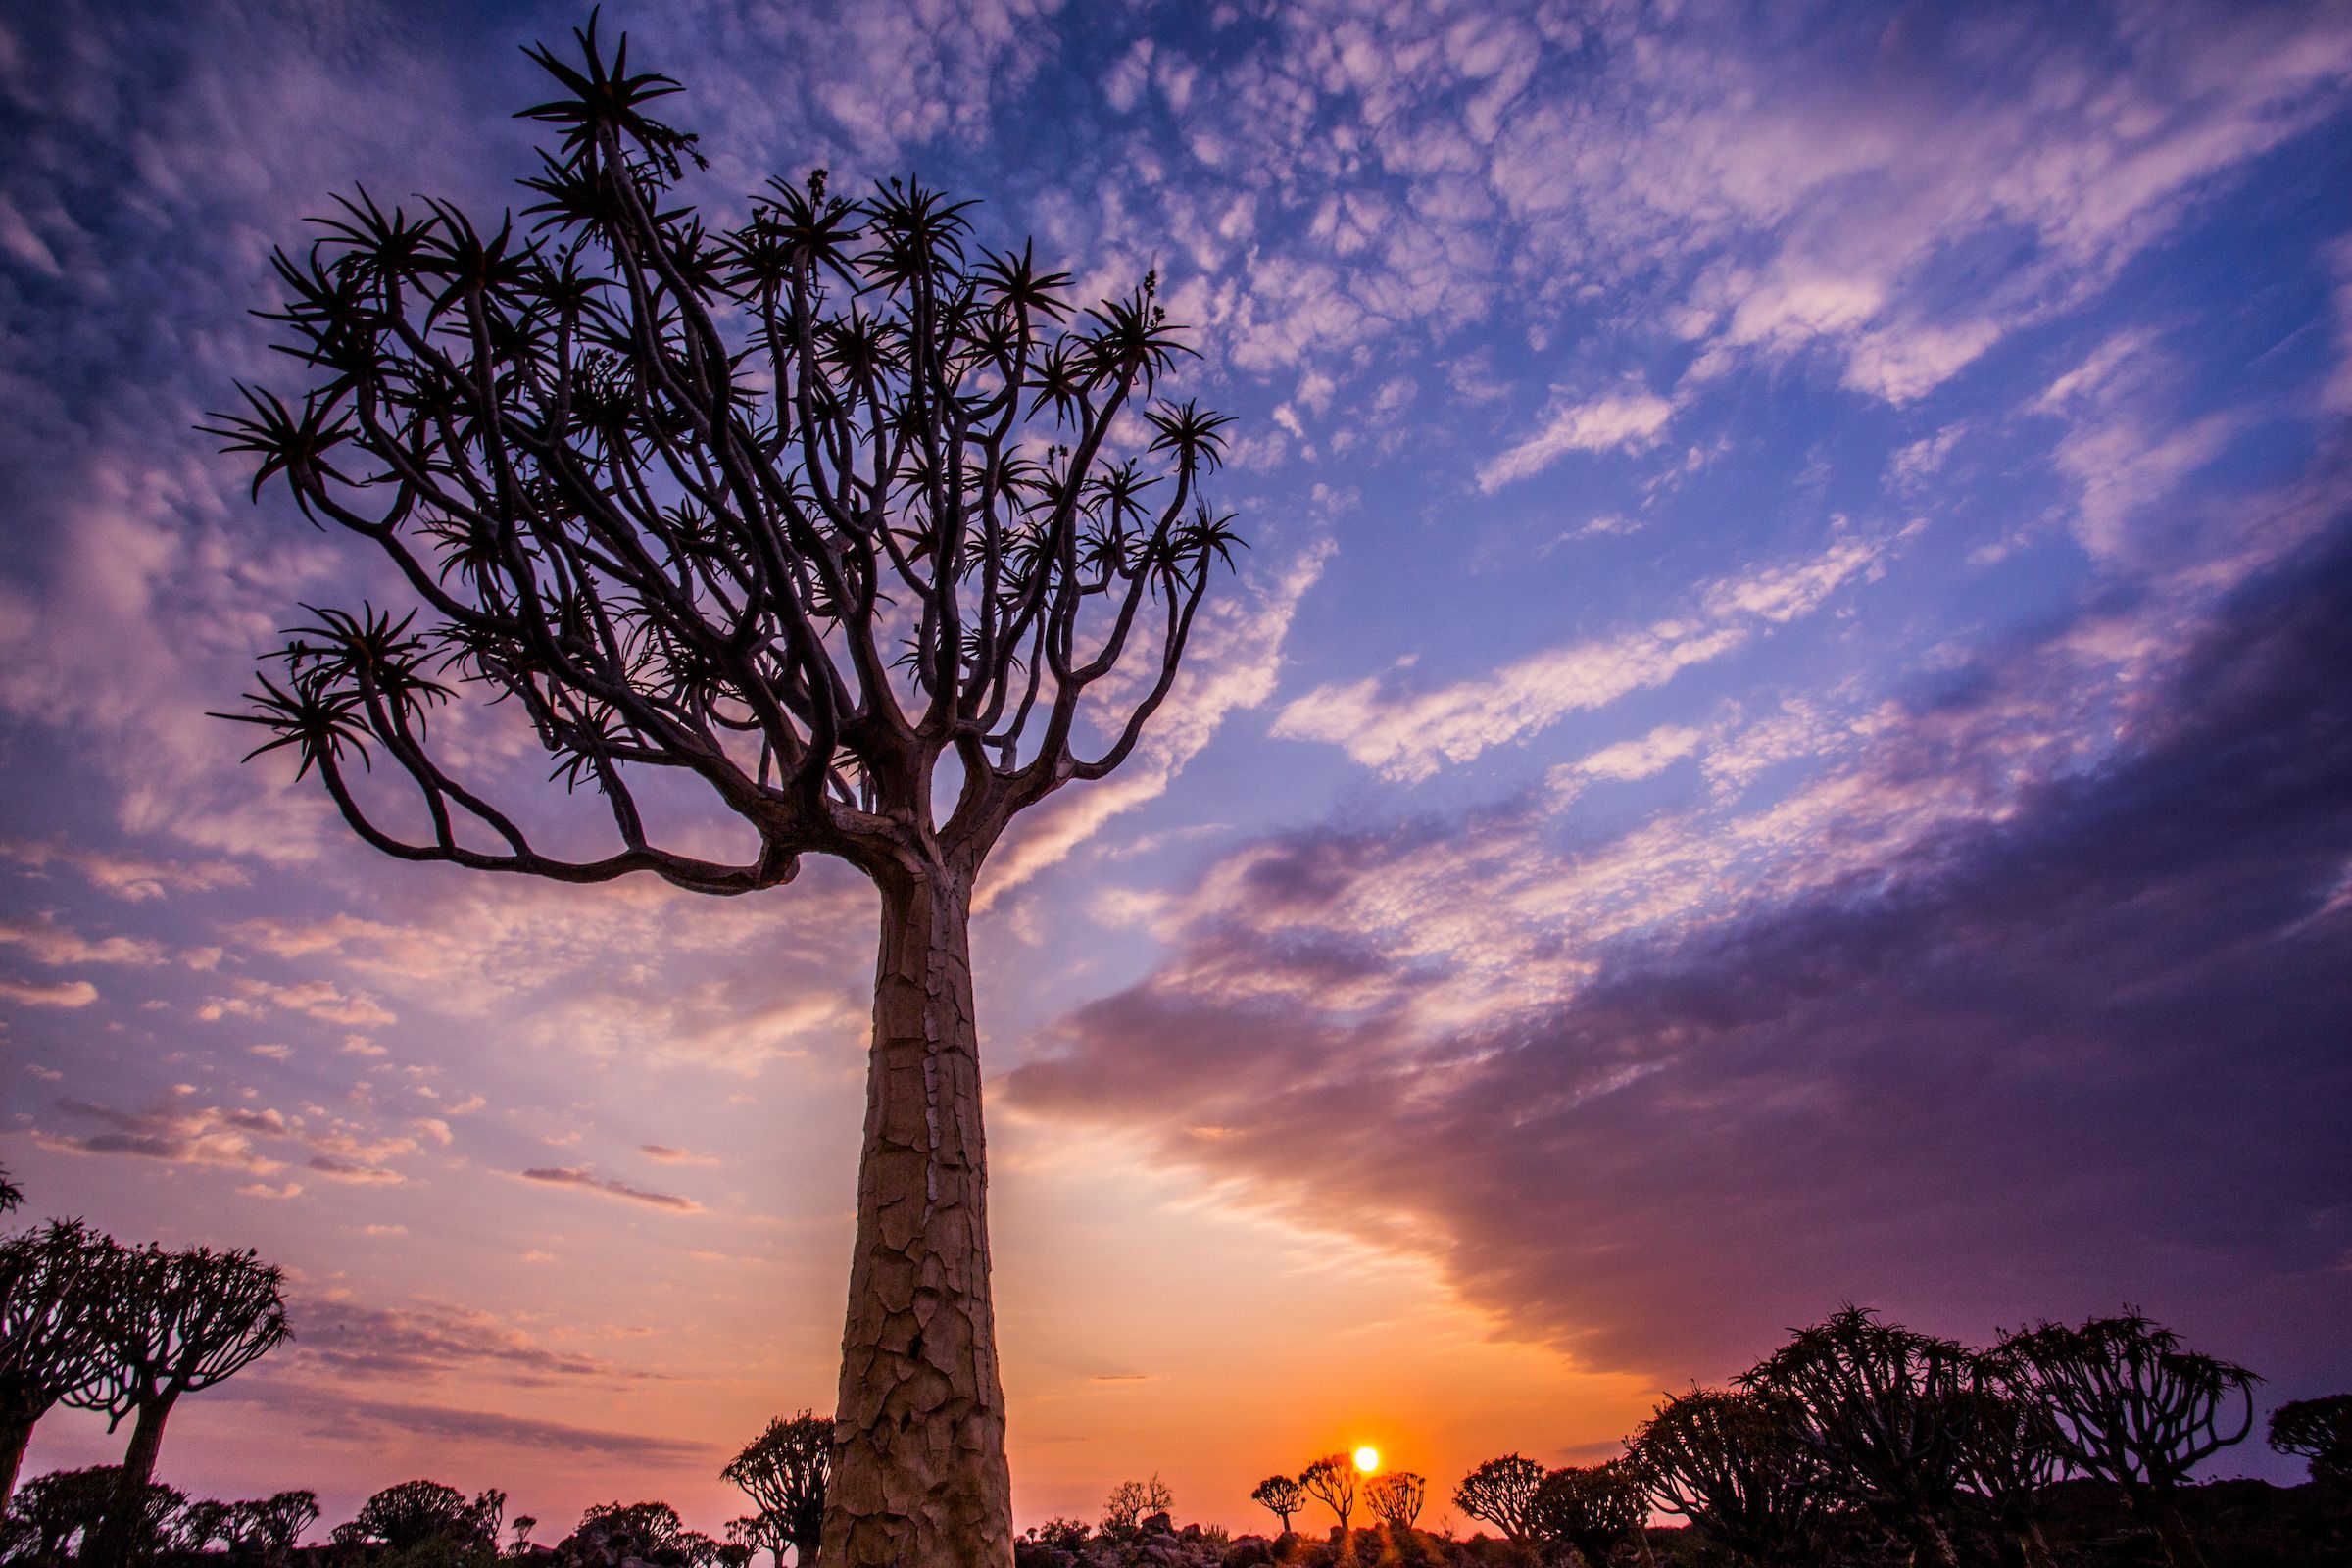 Be in the famous Quiver Tree Forest at sunrise during our Namibia photography tour